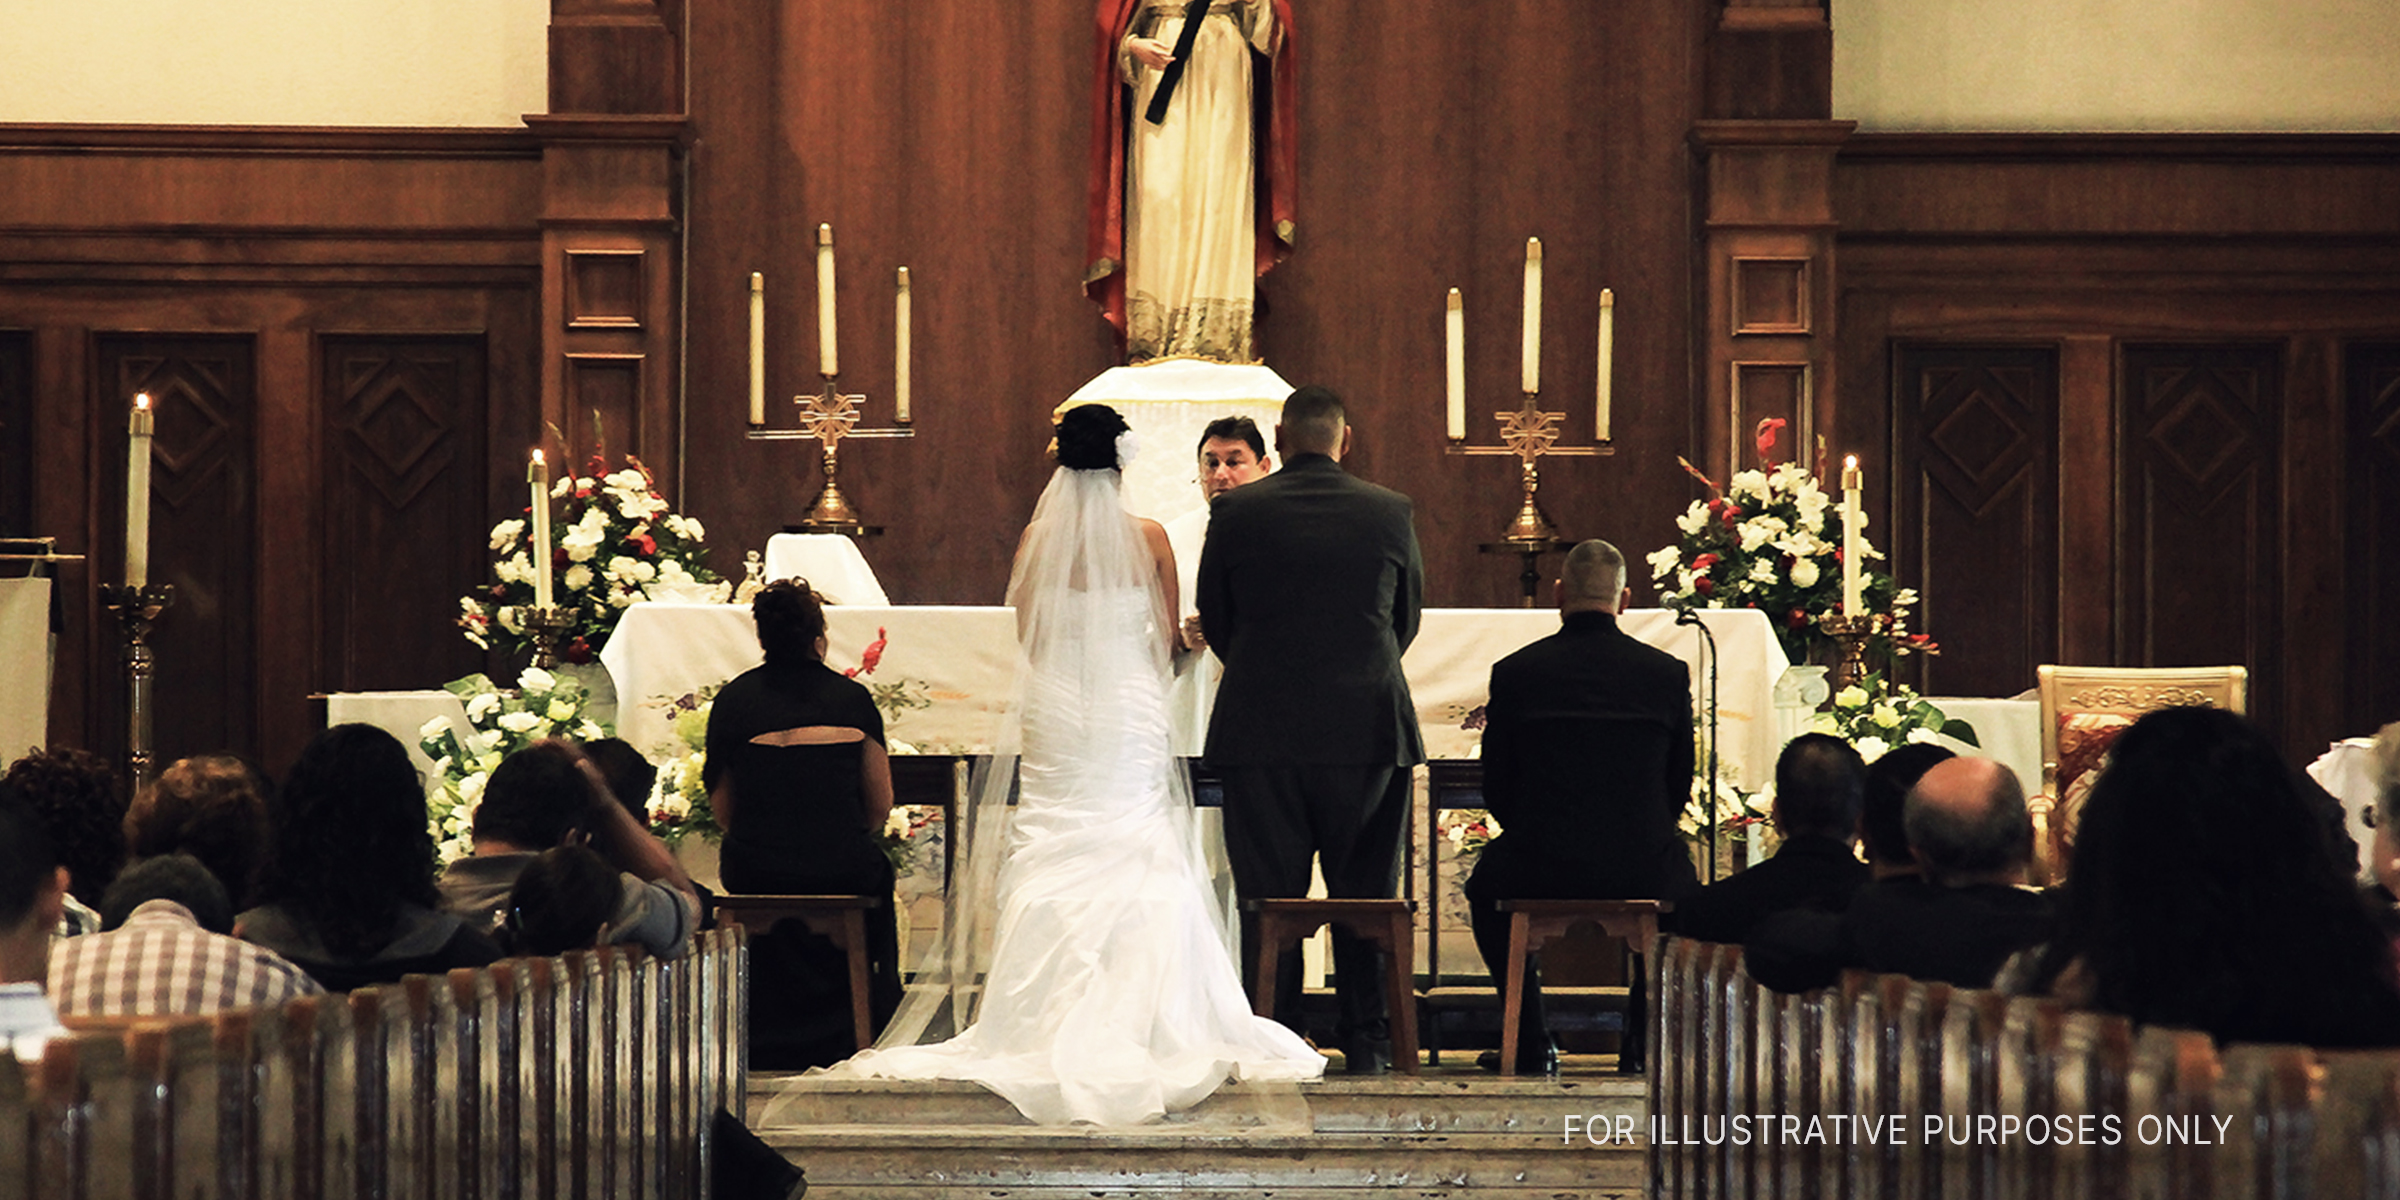 Bride and groom standing in a church | Source: Flickr/demxx (CC BY 2.0)